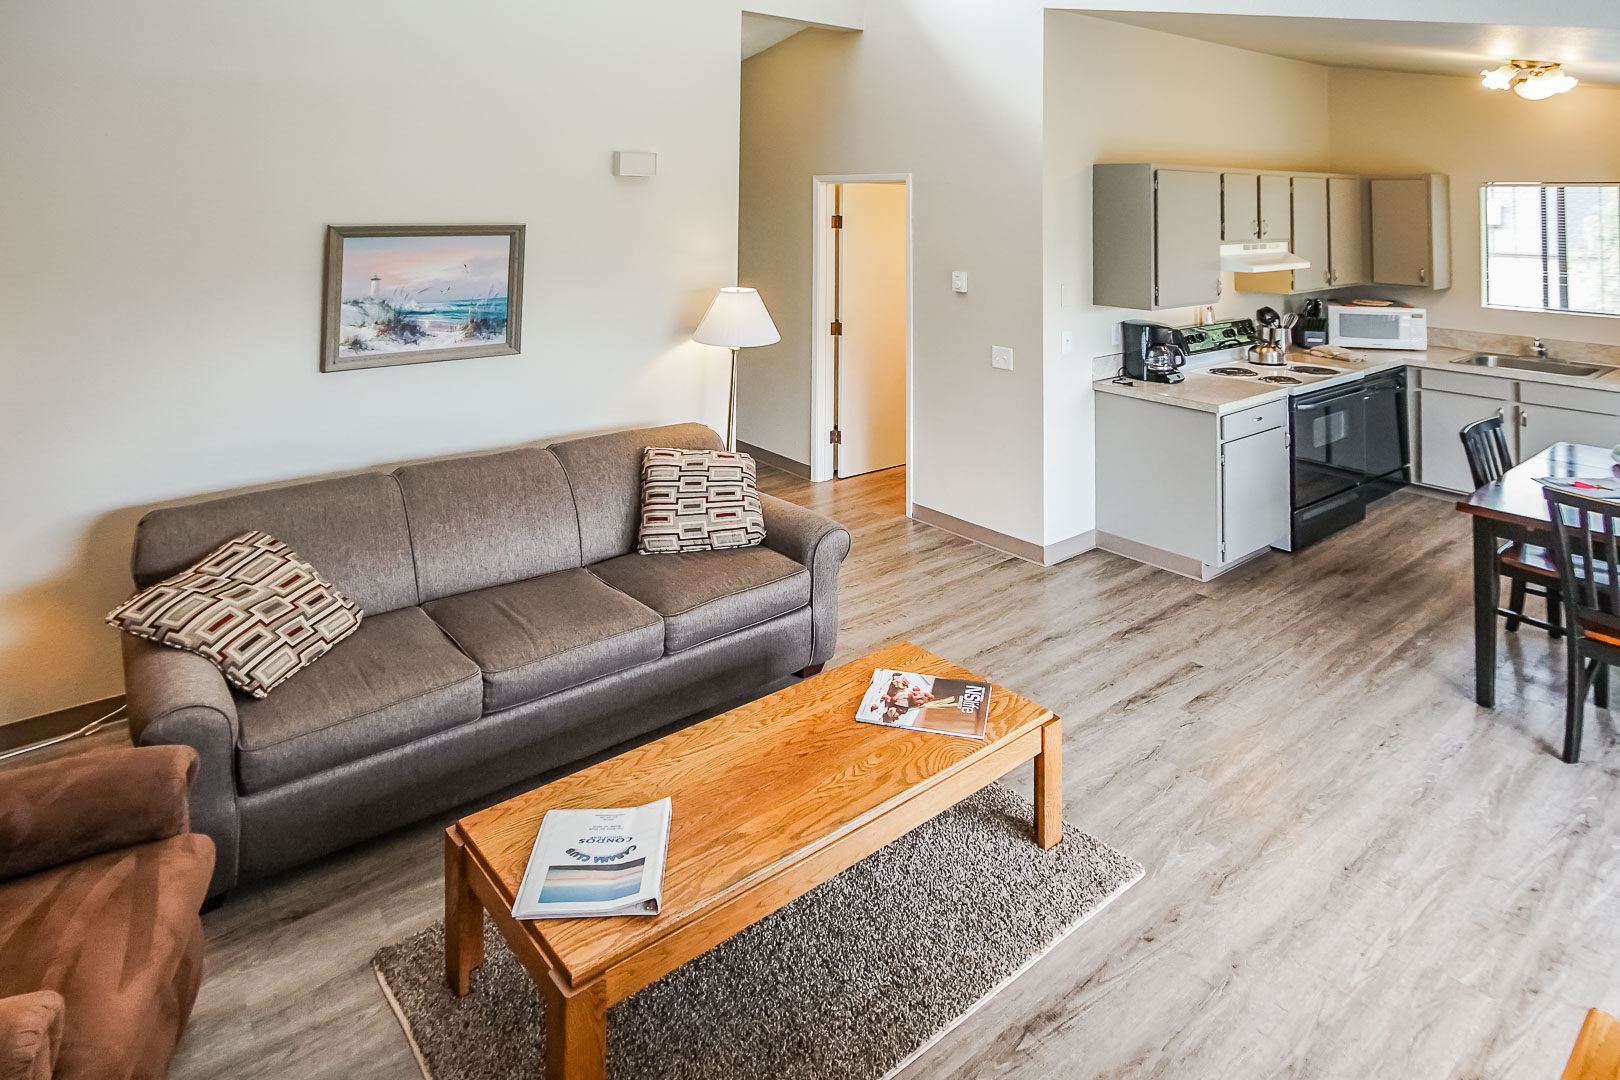 A fully renovated living room and kitchen at VRI's Cabana Club in Blaine, Washington.